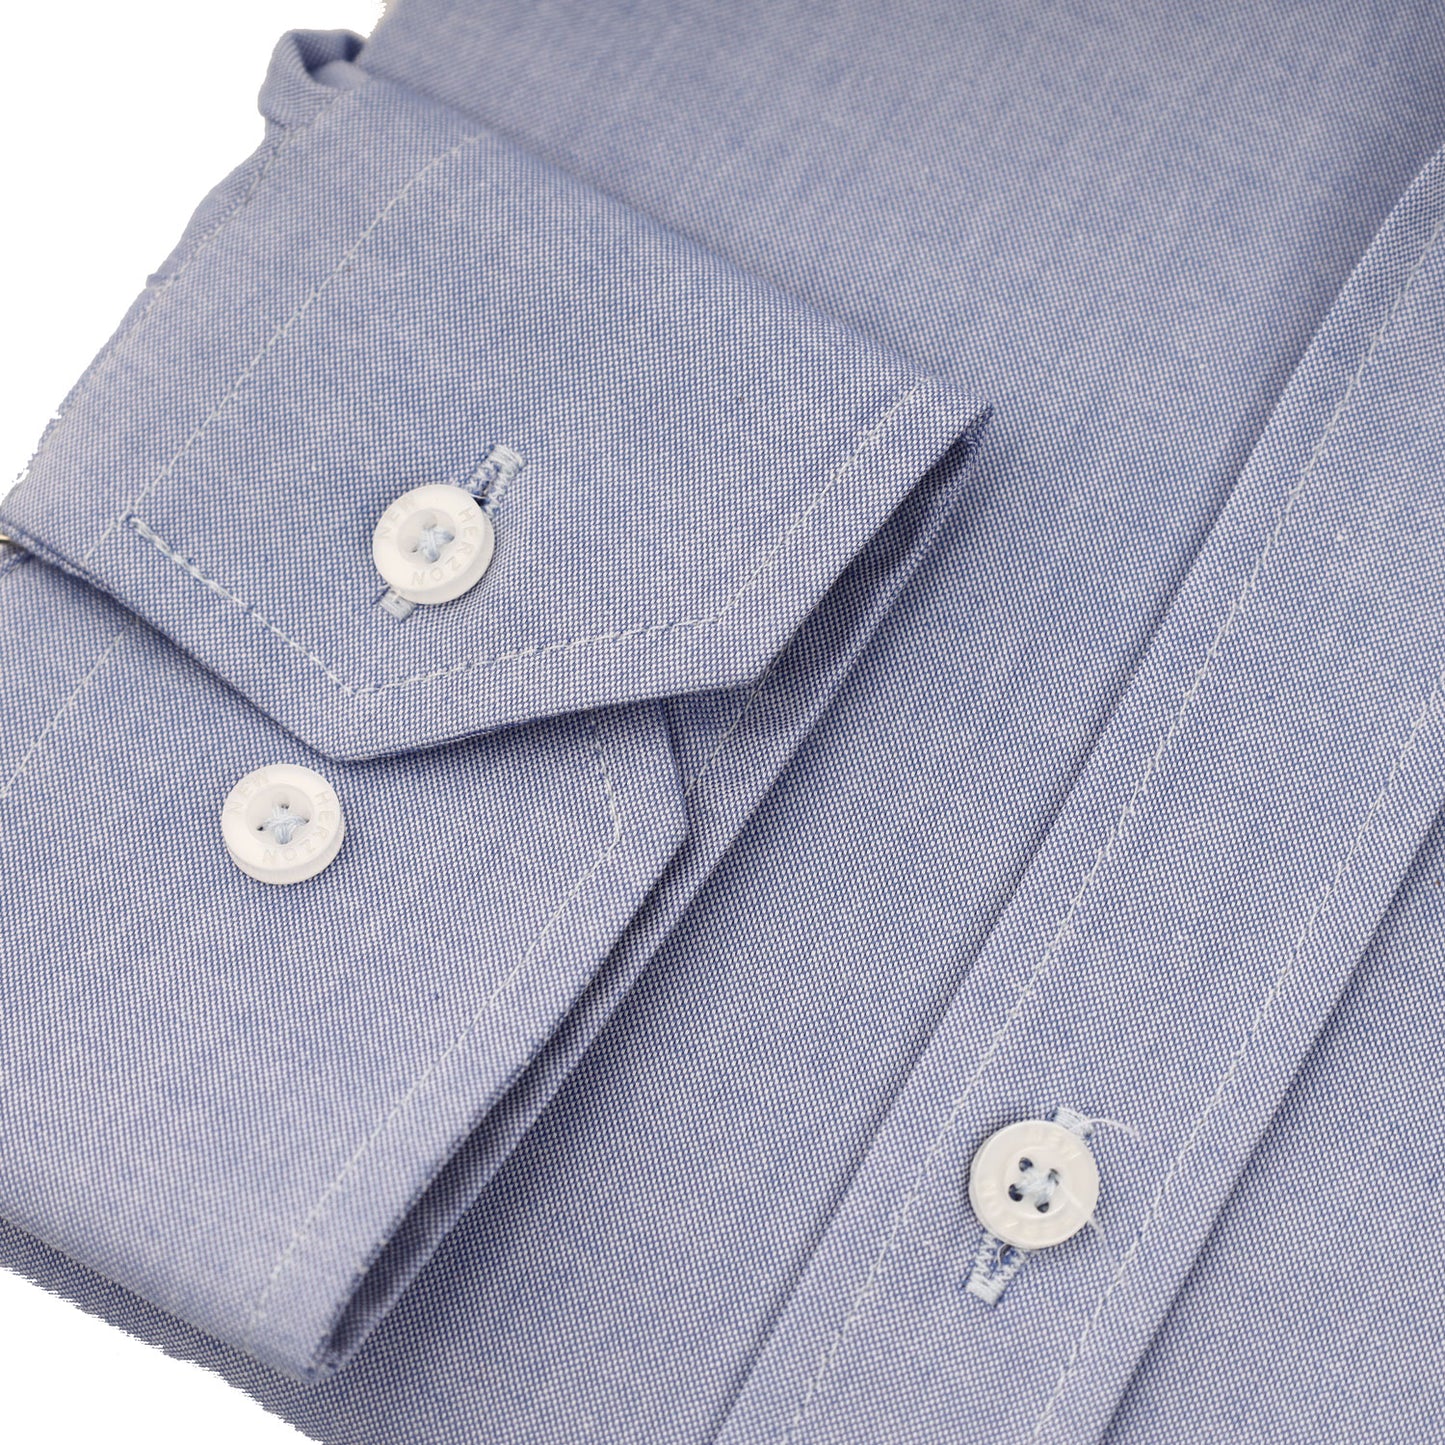 Baby blue baby oxford shirt